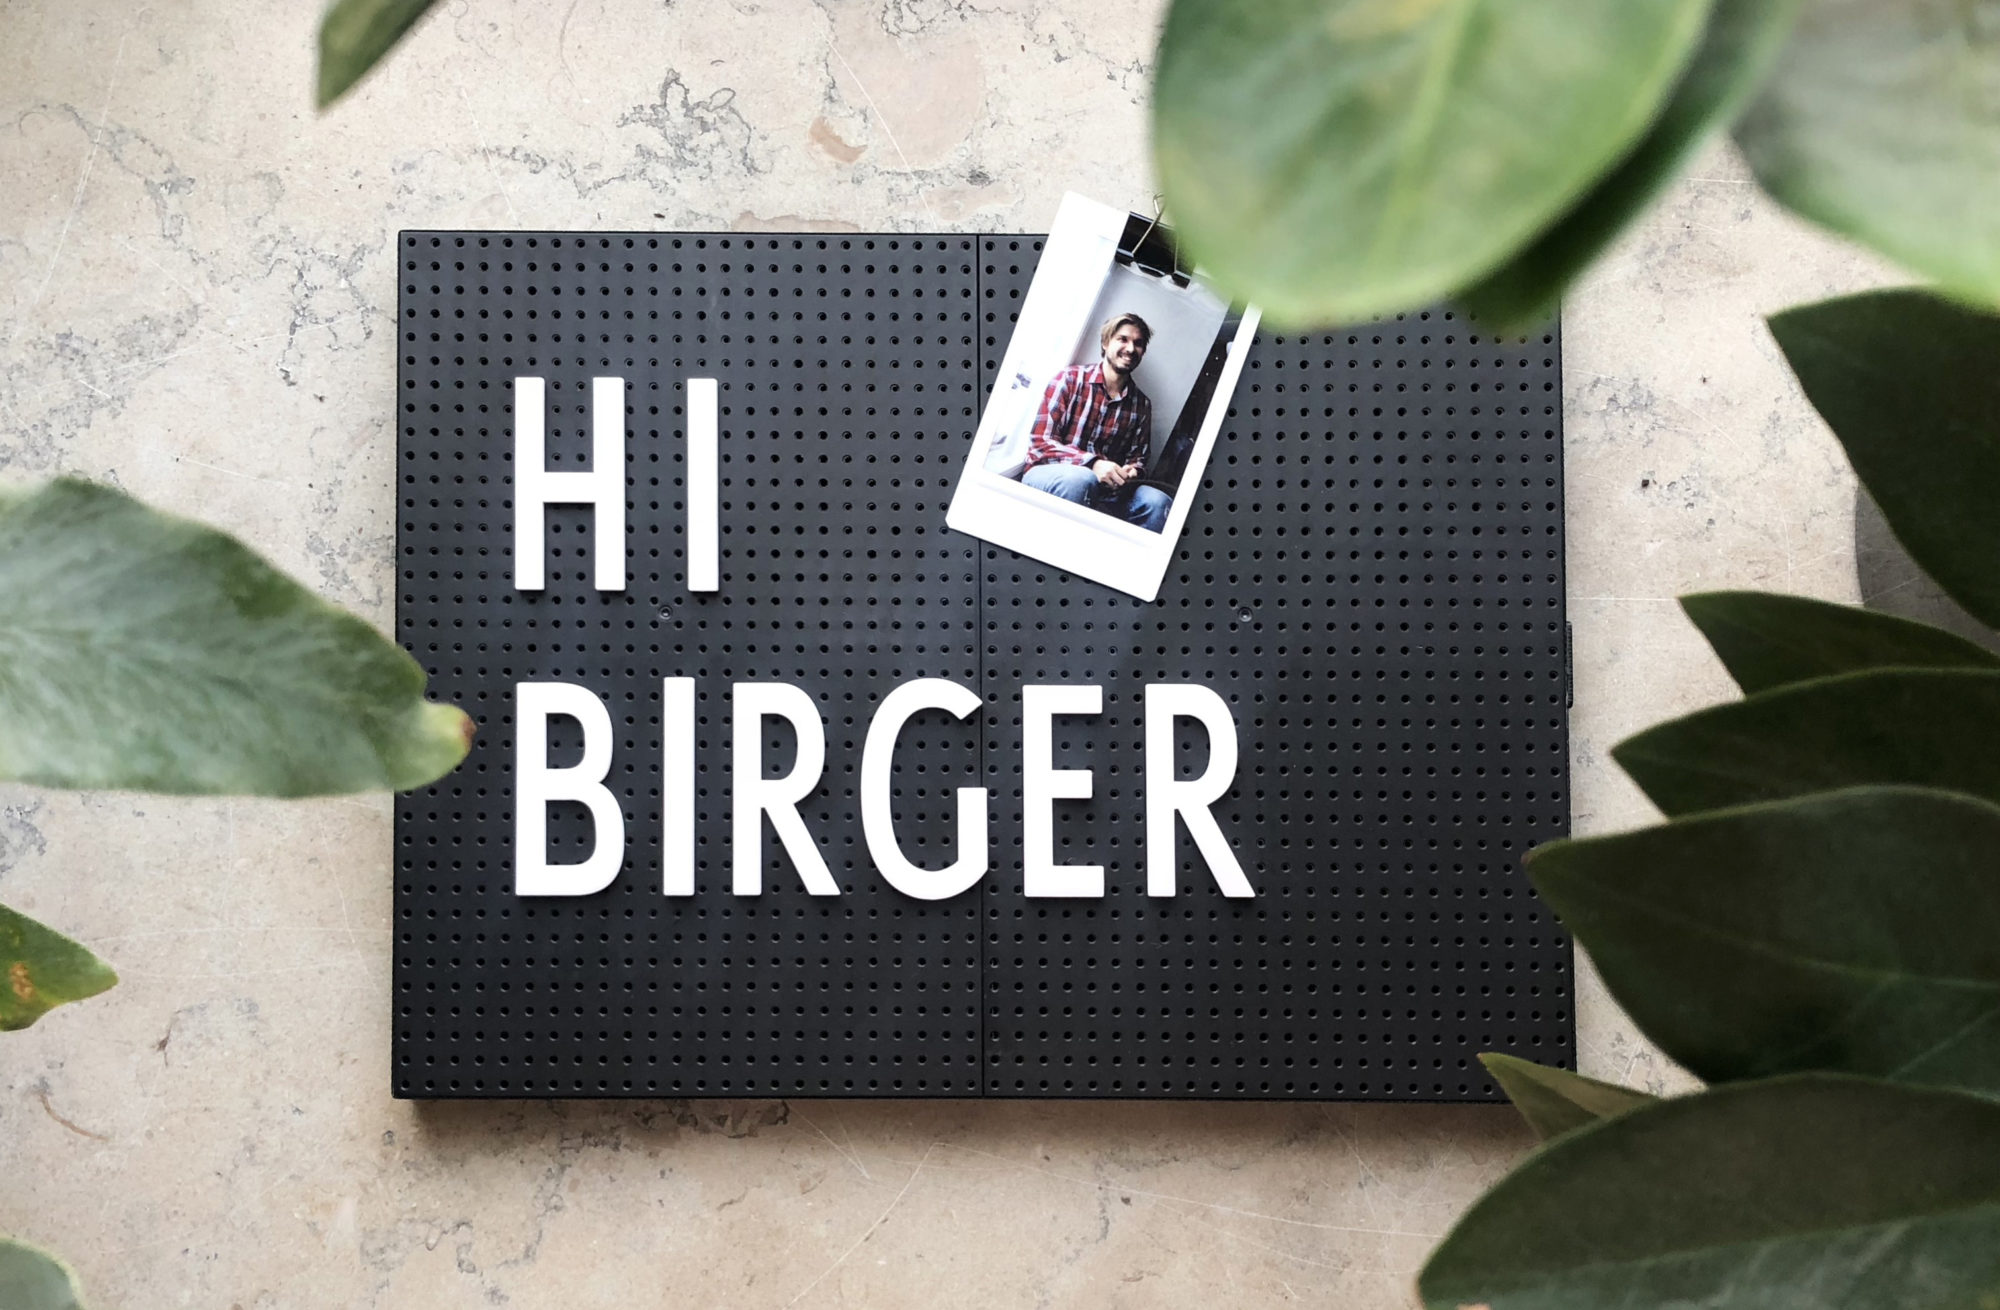 Say hello to Birger, our new Innovation Psychologist!